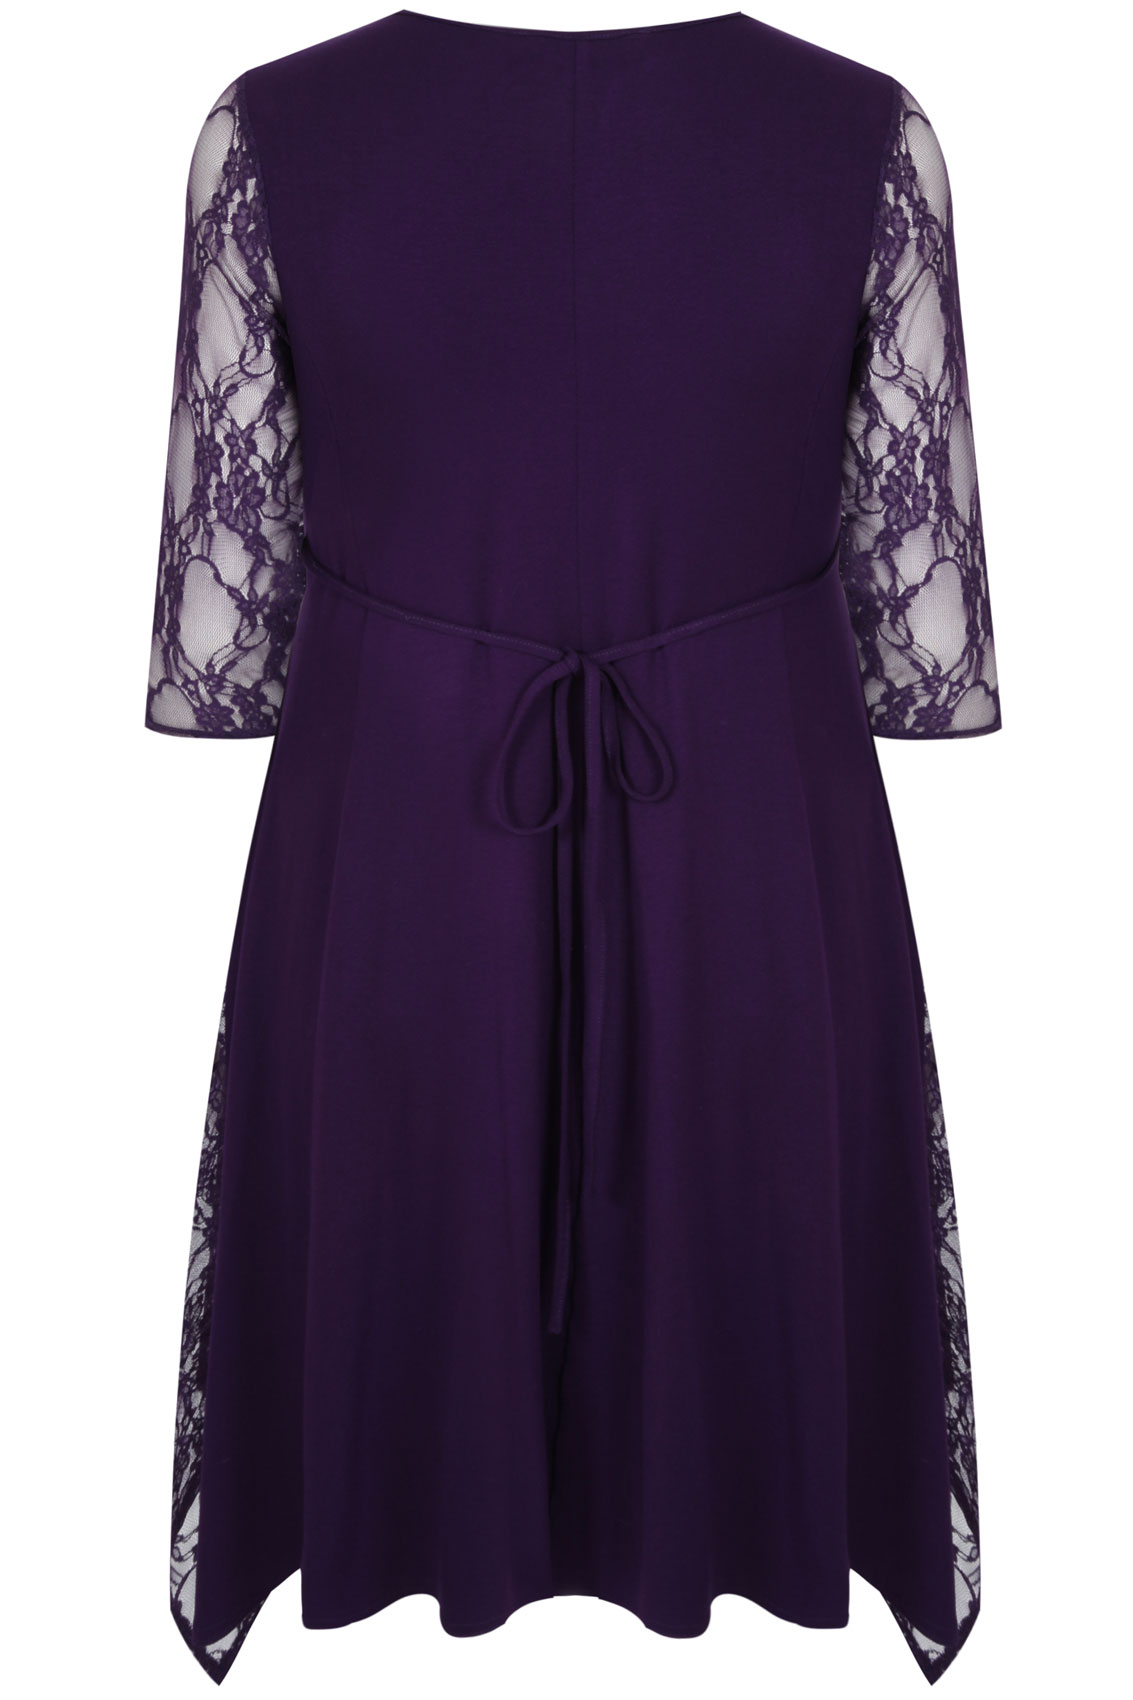 SCARLET & JO Purple Tunic Dress With Lace Detail Plus Size 14 to 28